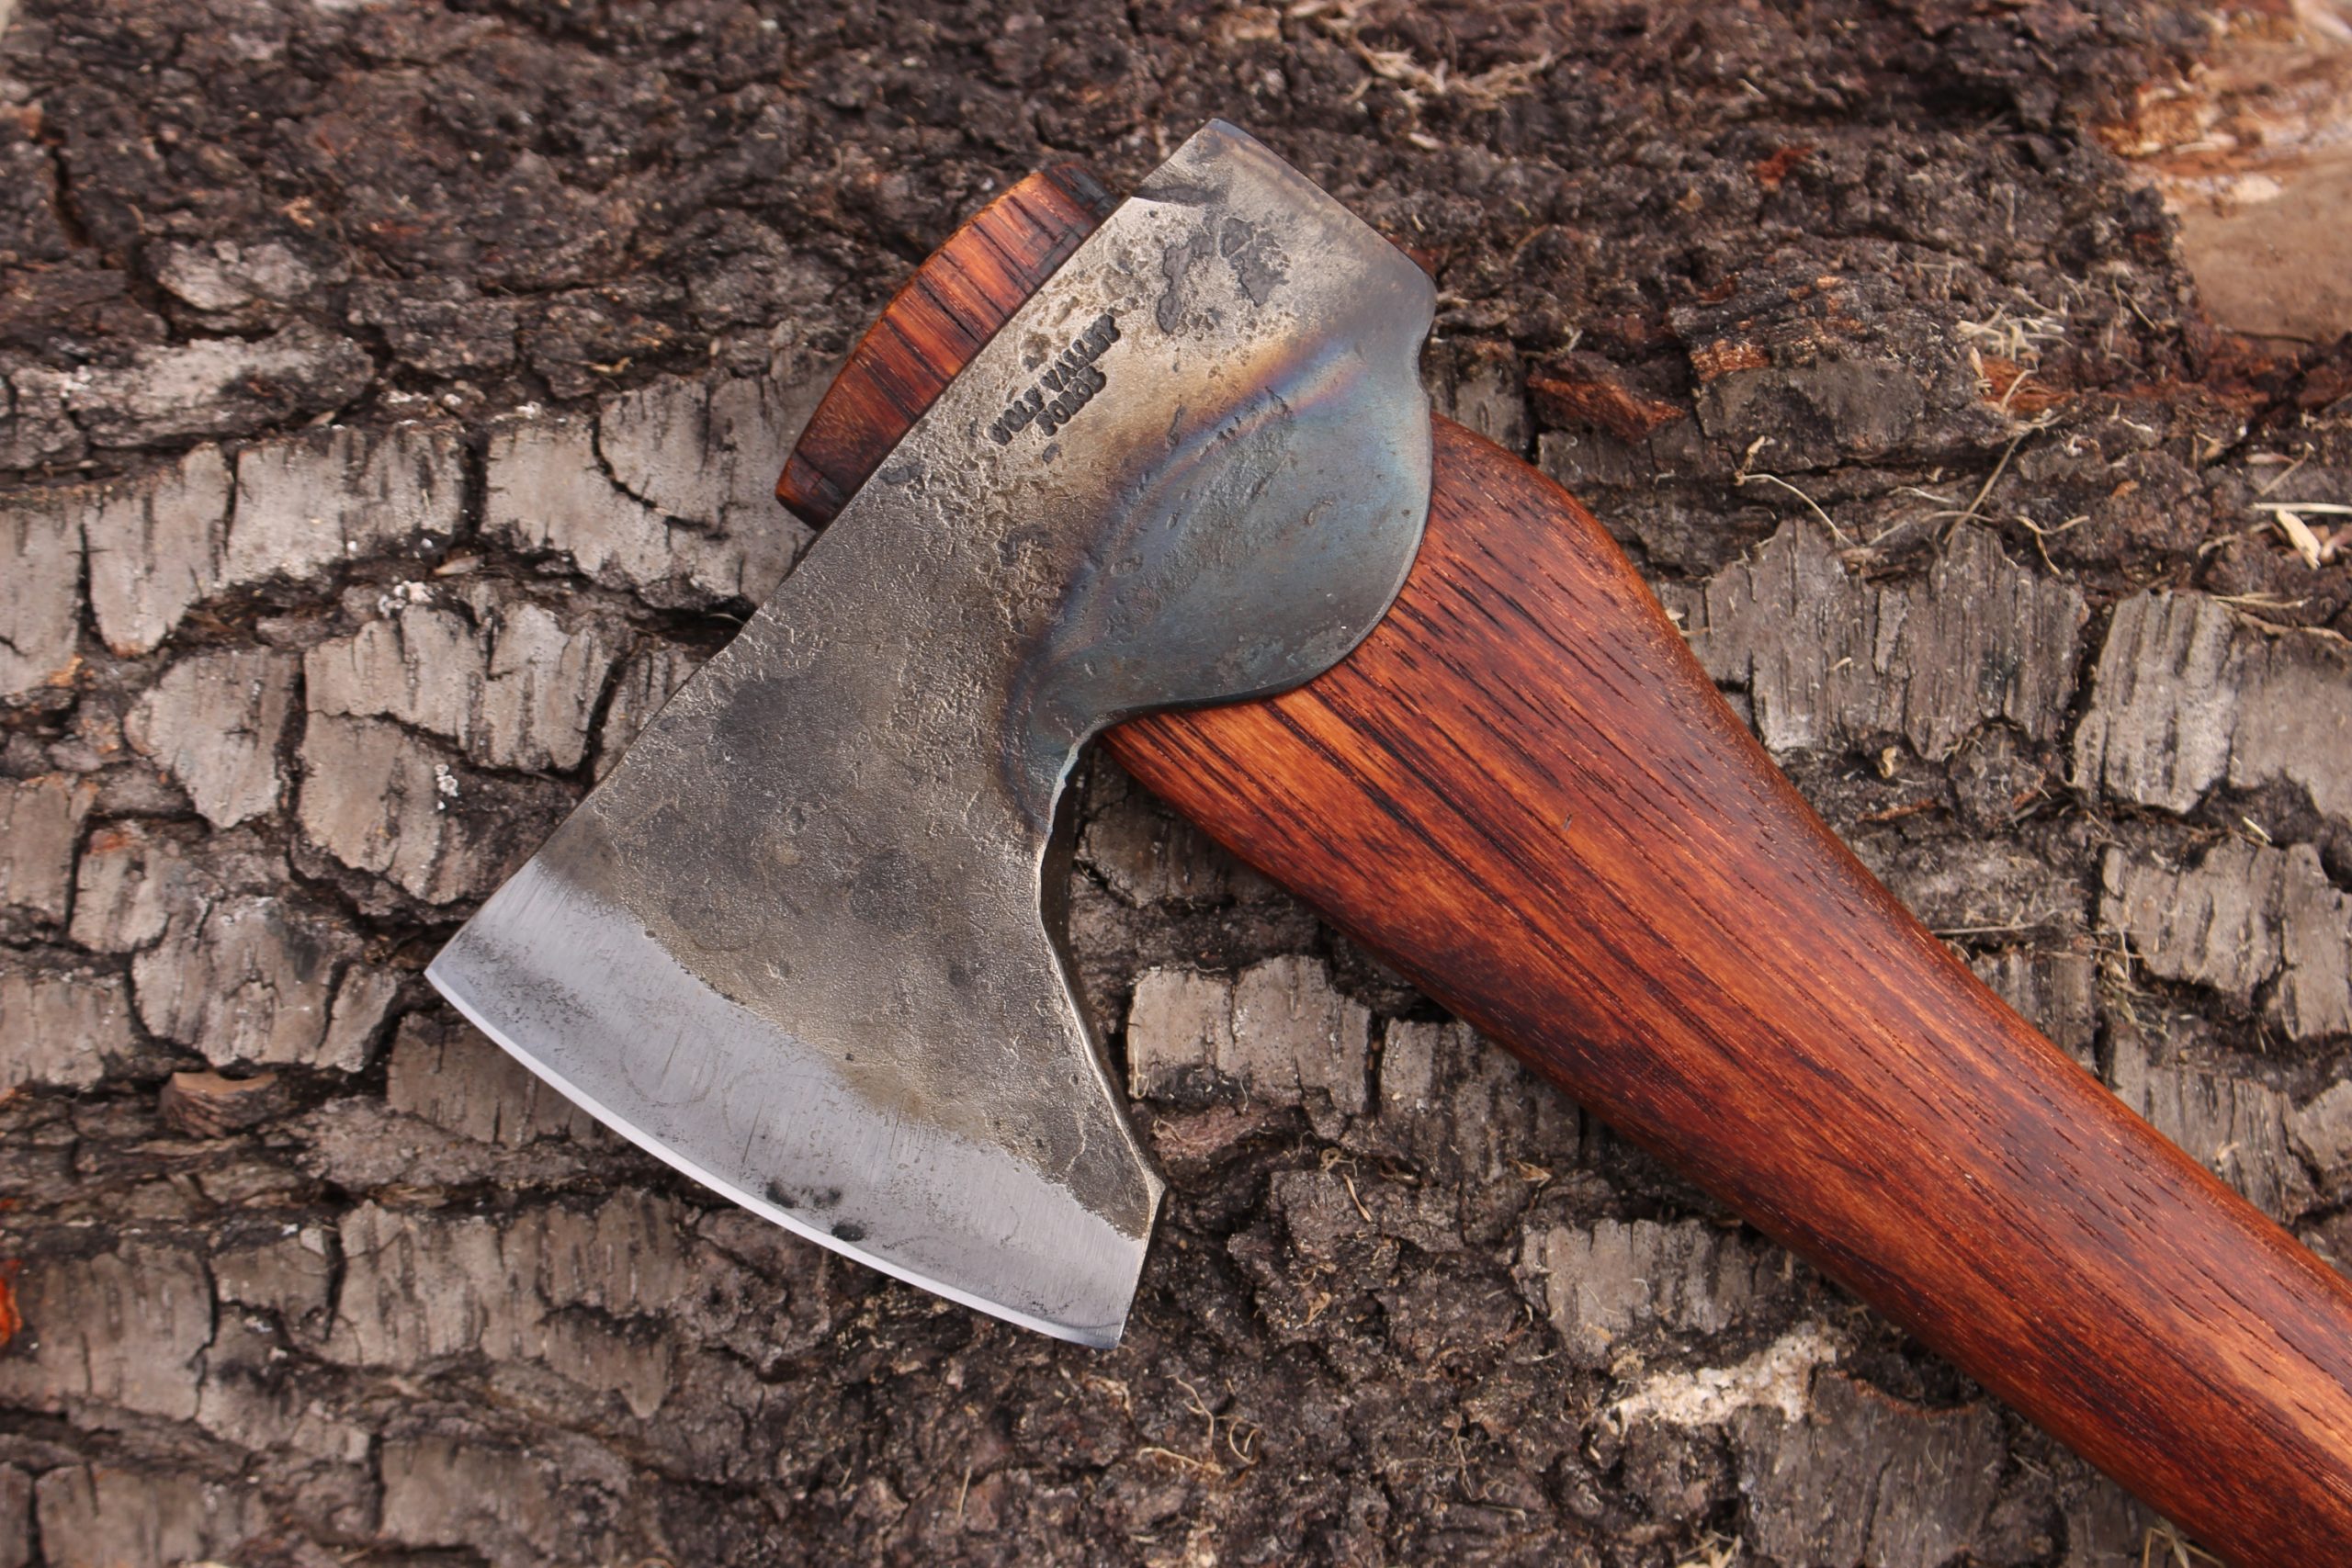 handmade, usa made, usa made axe, hatchet, chopping, wood chopping, outdoor, outdoorsman, survival, backwoodsman, hickory, axe made in america, axes made in the usa, ike bullington, wolf valley forge, valley forge, pack axe, back packing, camping, trail axe, hunting axe, trappers axe, camp axe, bush axe, belt axe, pack axe, leather shoulder rig, chopping axe, leather axe carrier, shoulder sling for axe, carpenter's axe, Wolf Valley Forge, Wolf Valley Forge axe release, Axe Wax, haversack, go back, man purse, man bag, canvas bag, reenactor, reenacting, The Trekker